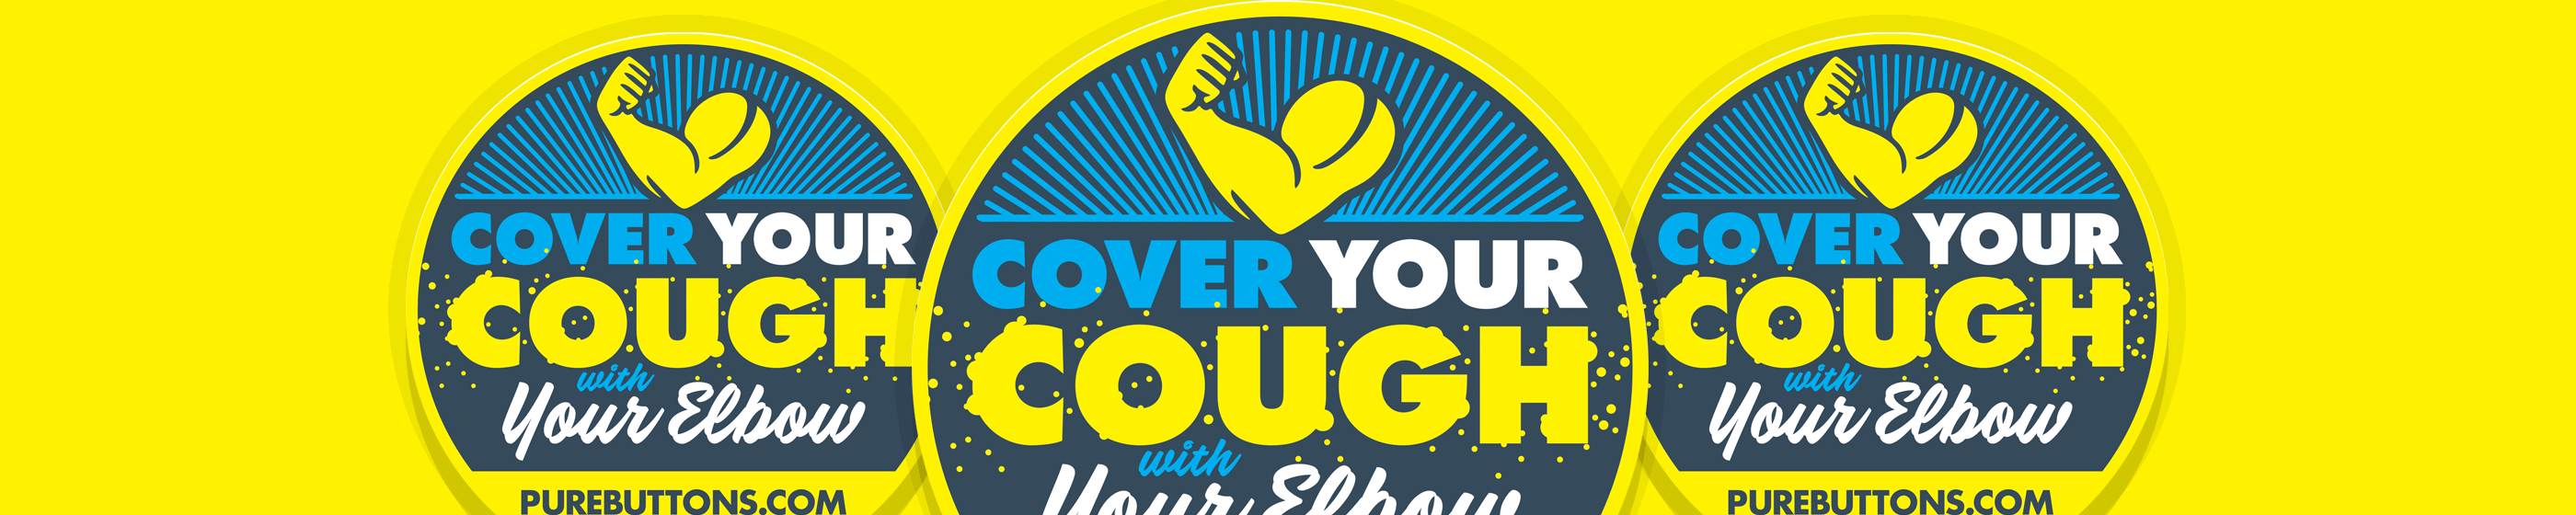 Cover Your Cough Button Cover Image